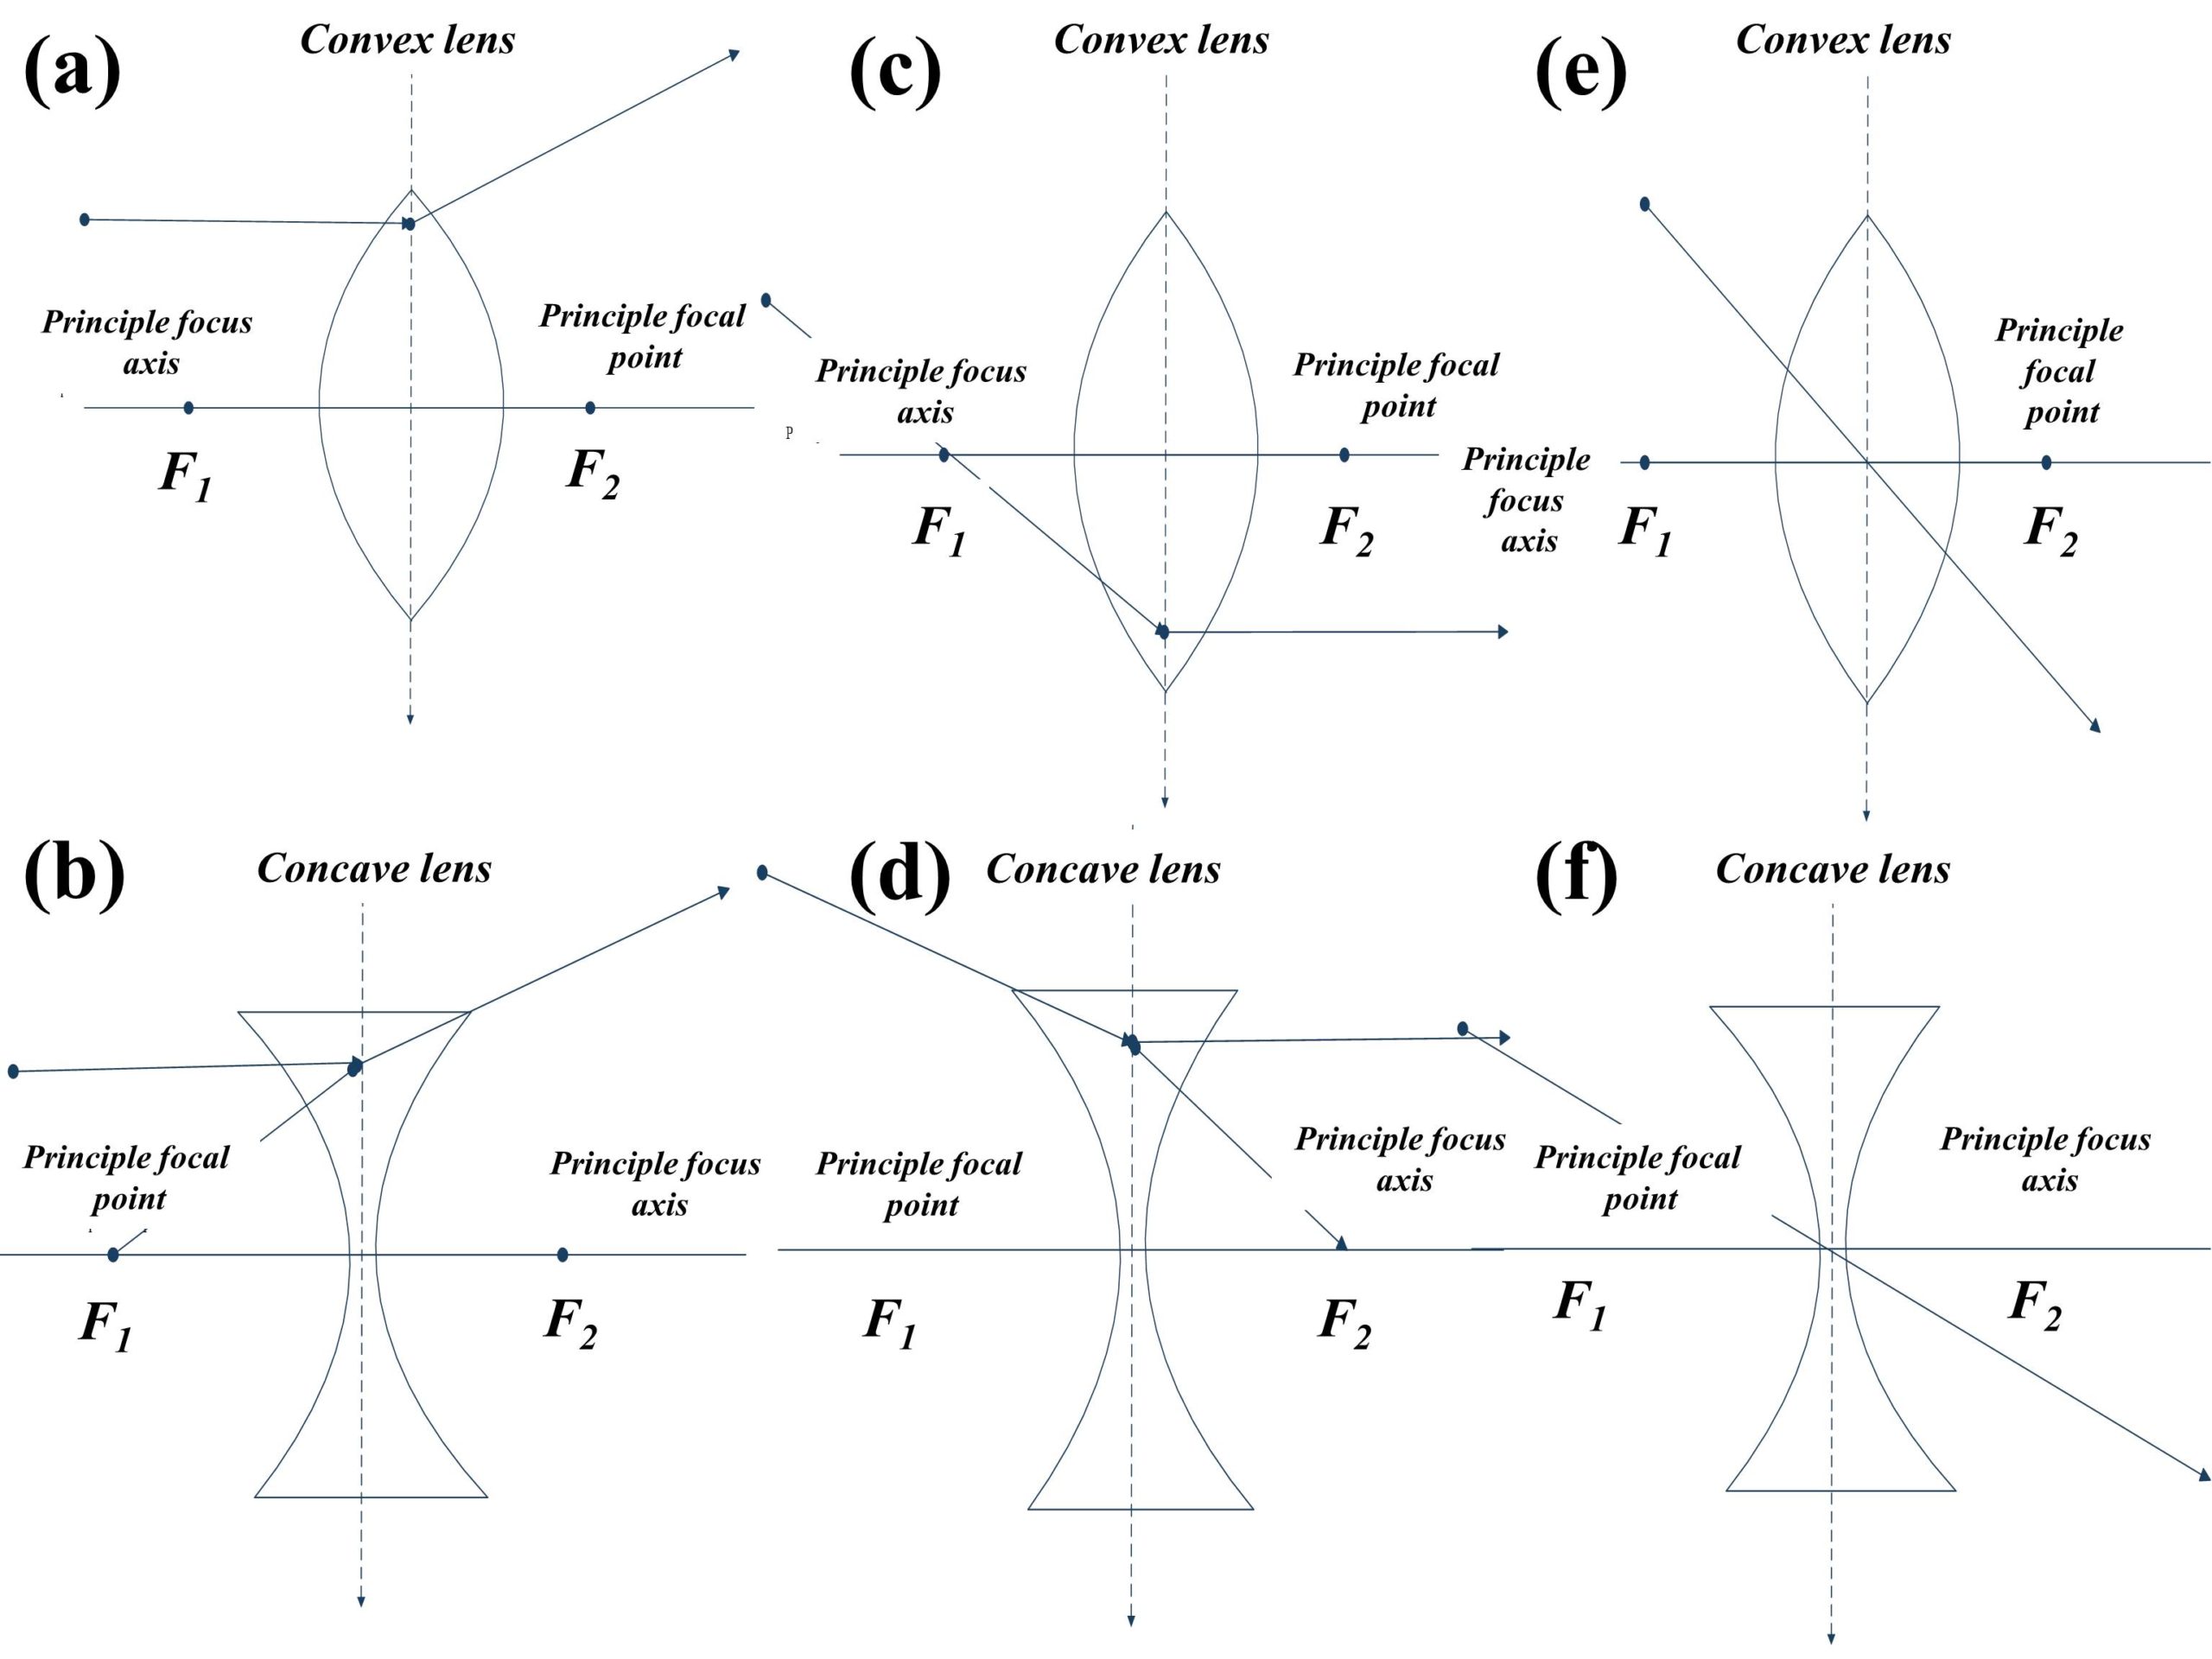 Rules of image formation shown through concave and convex lens.